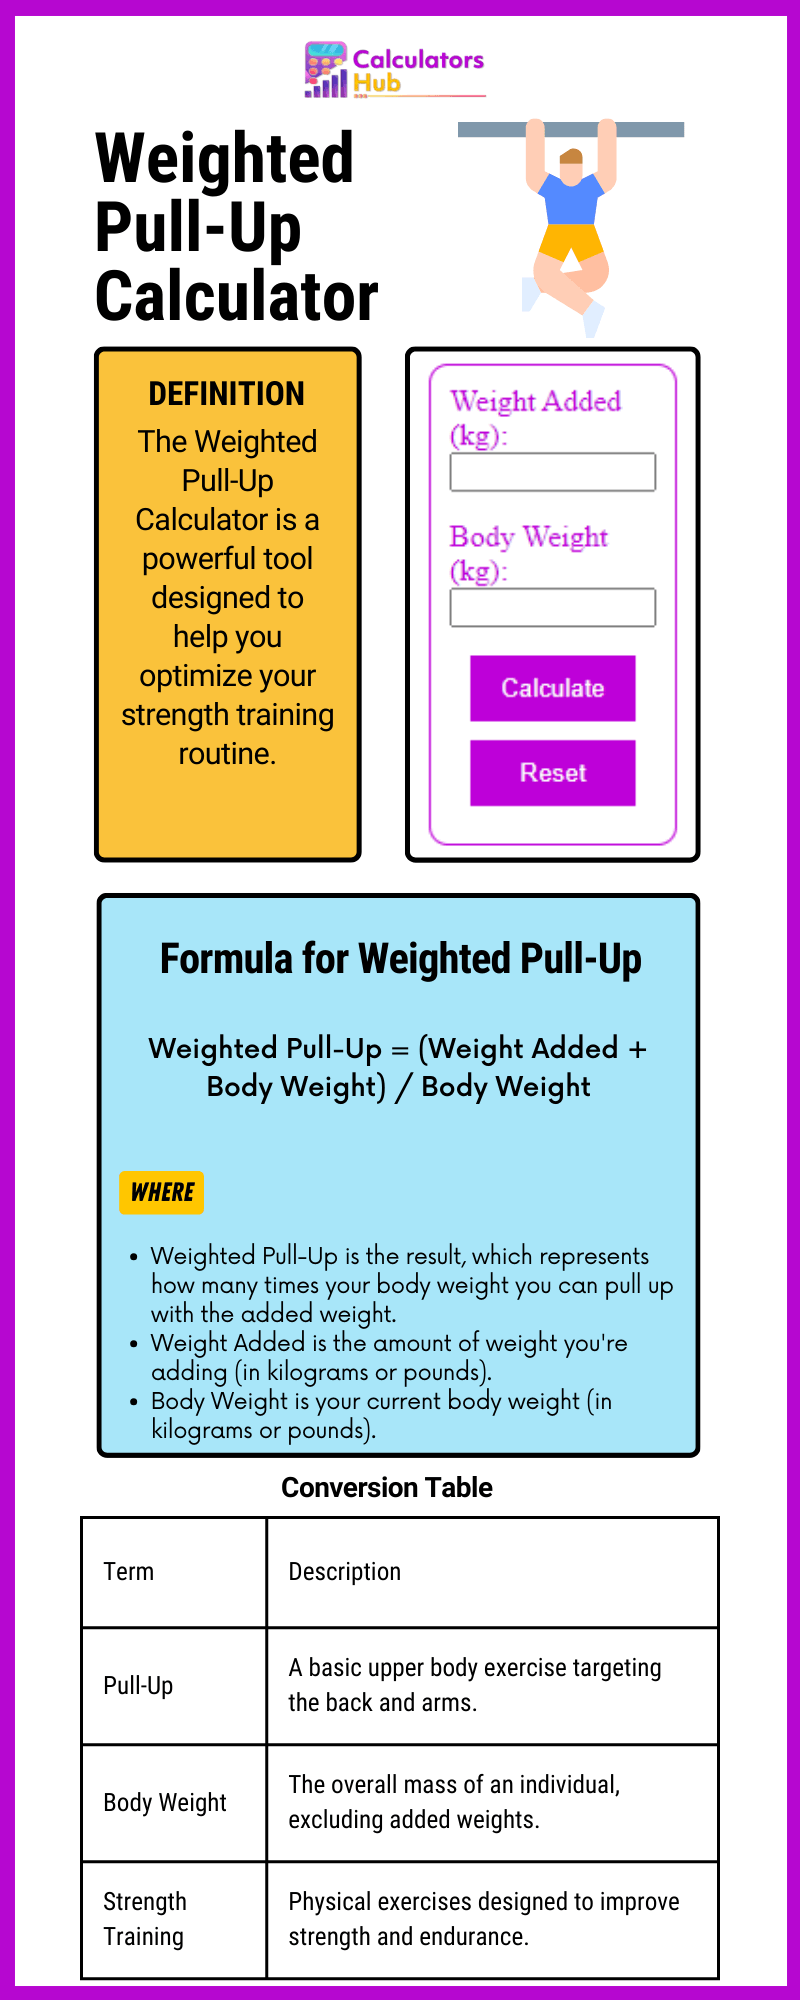 Weighted Pull-Up Calculator